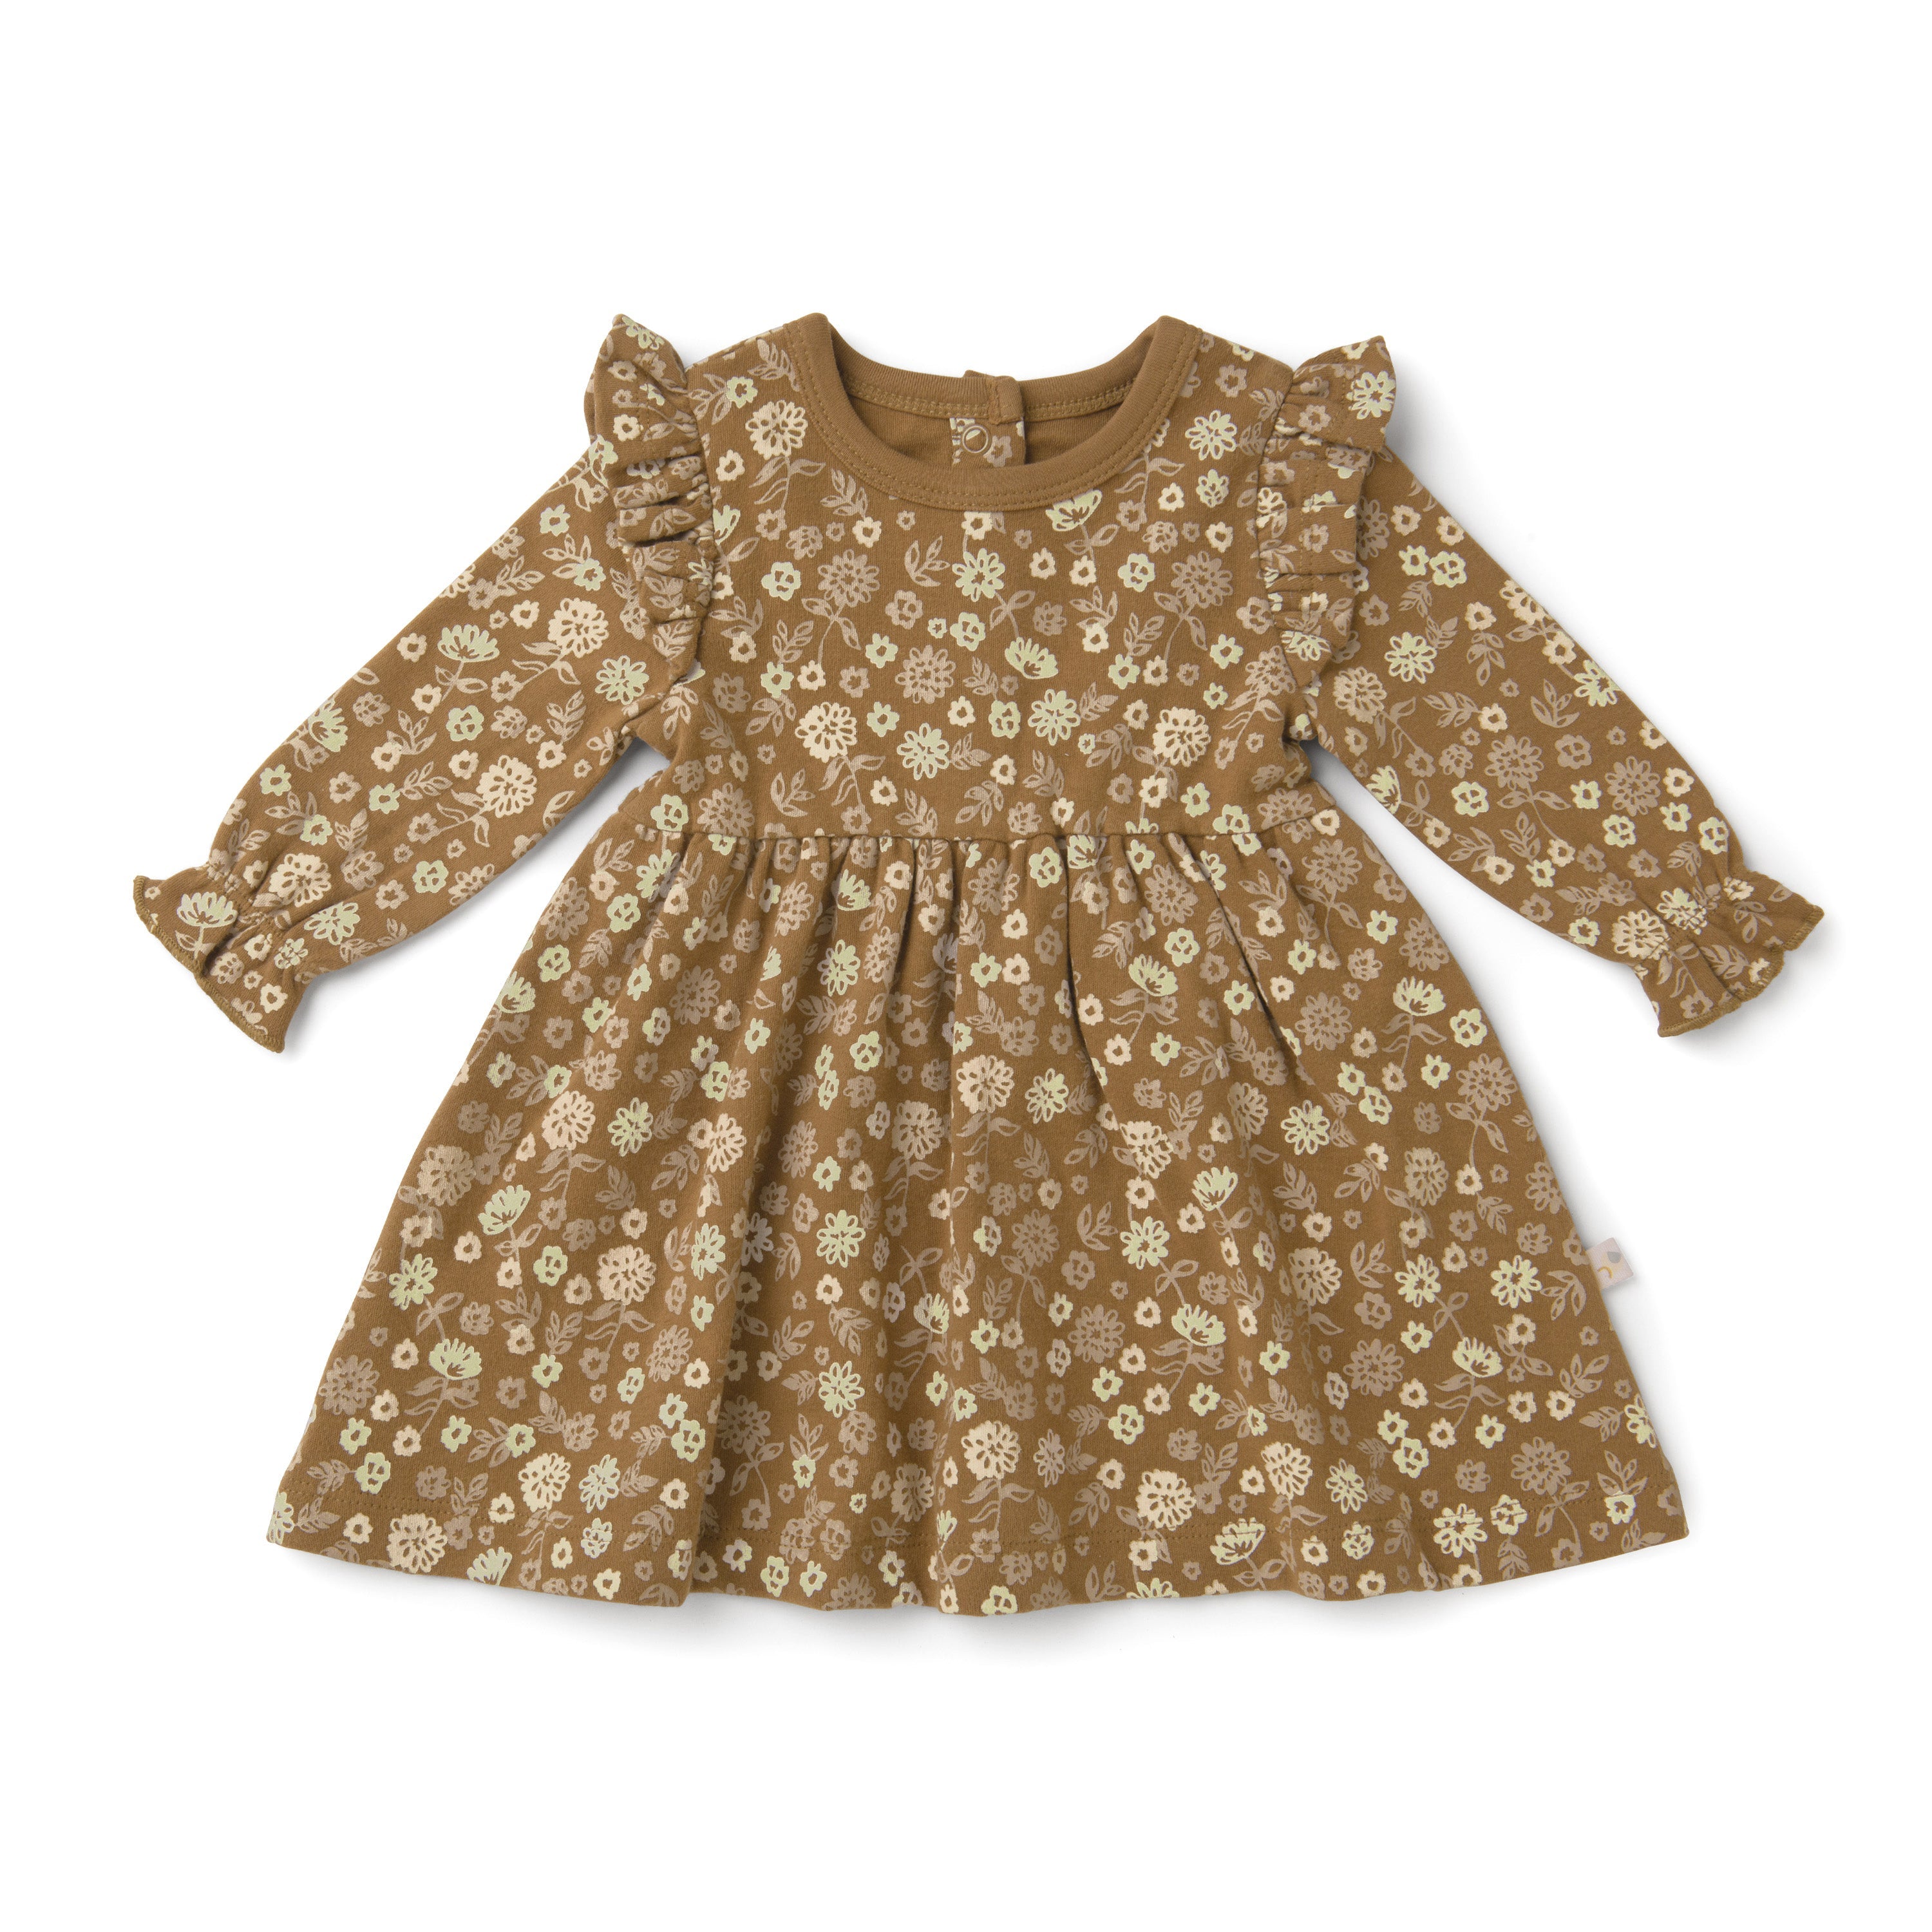 A Organic Girls brown toddler dress with long sleeves and an allover floral print, featuring ruffled shoulders, displayed on a white background.